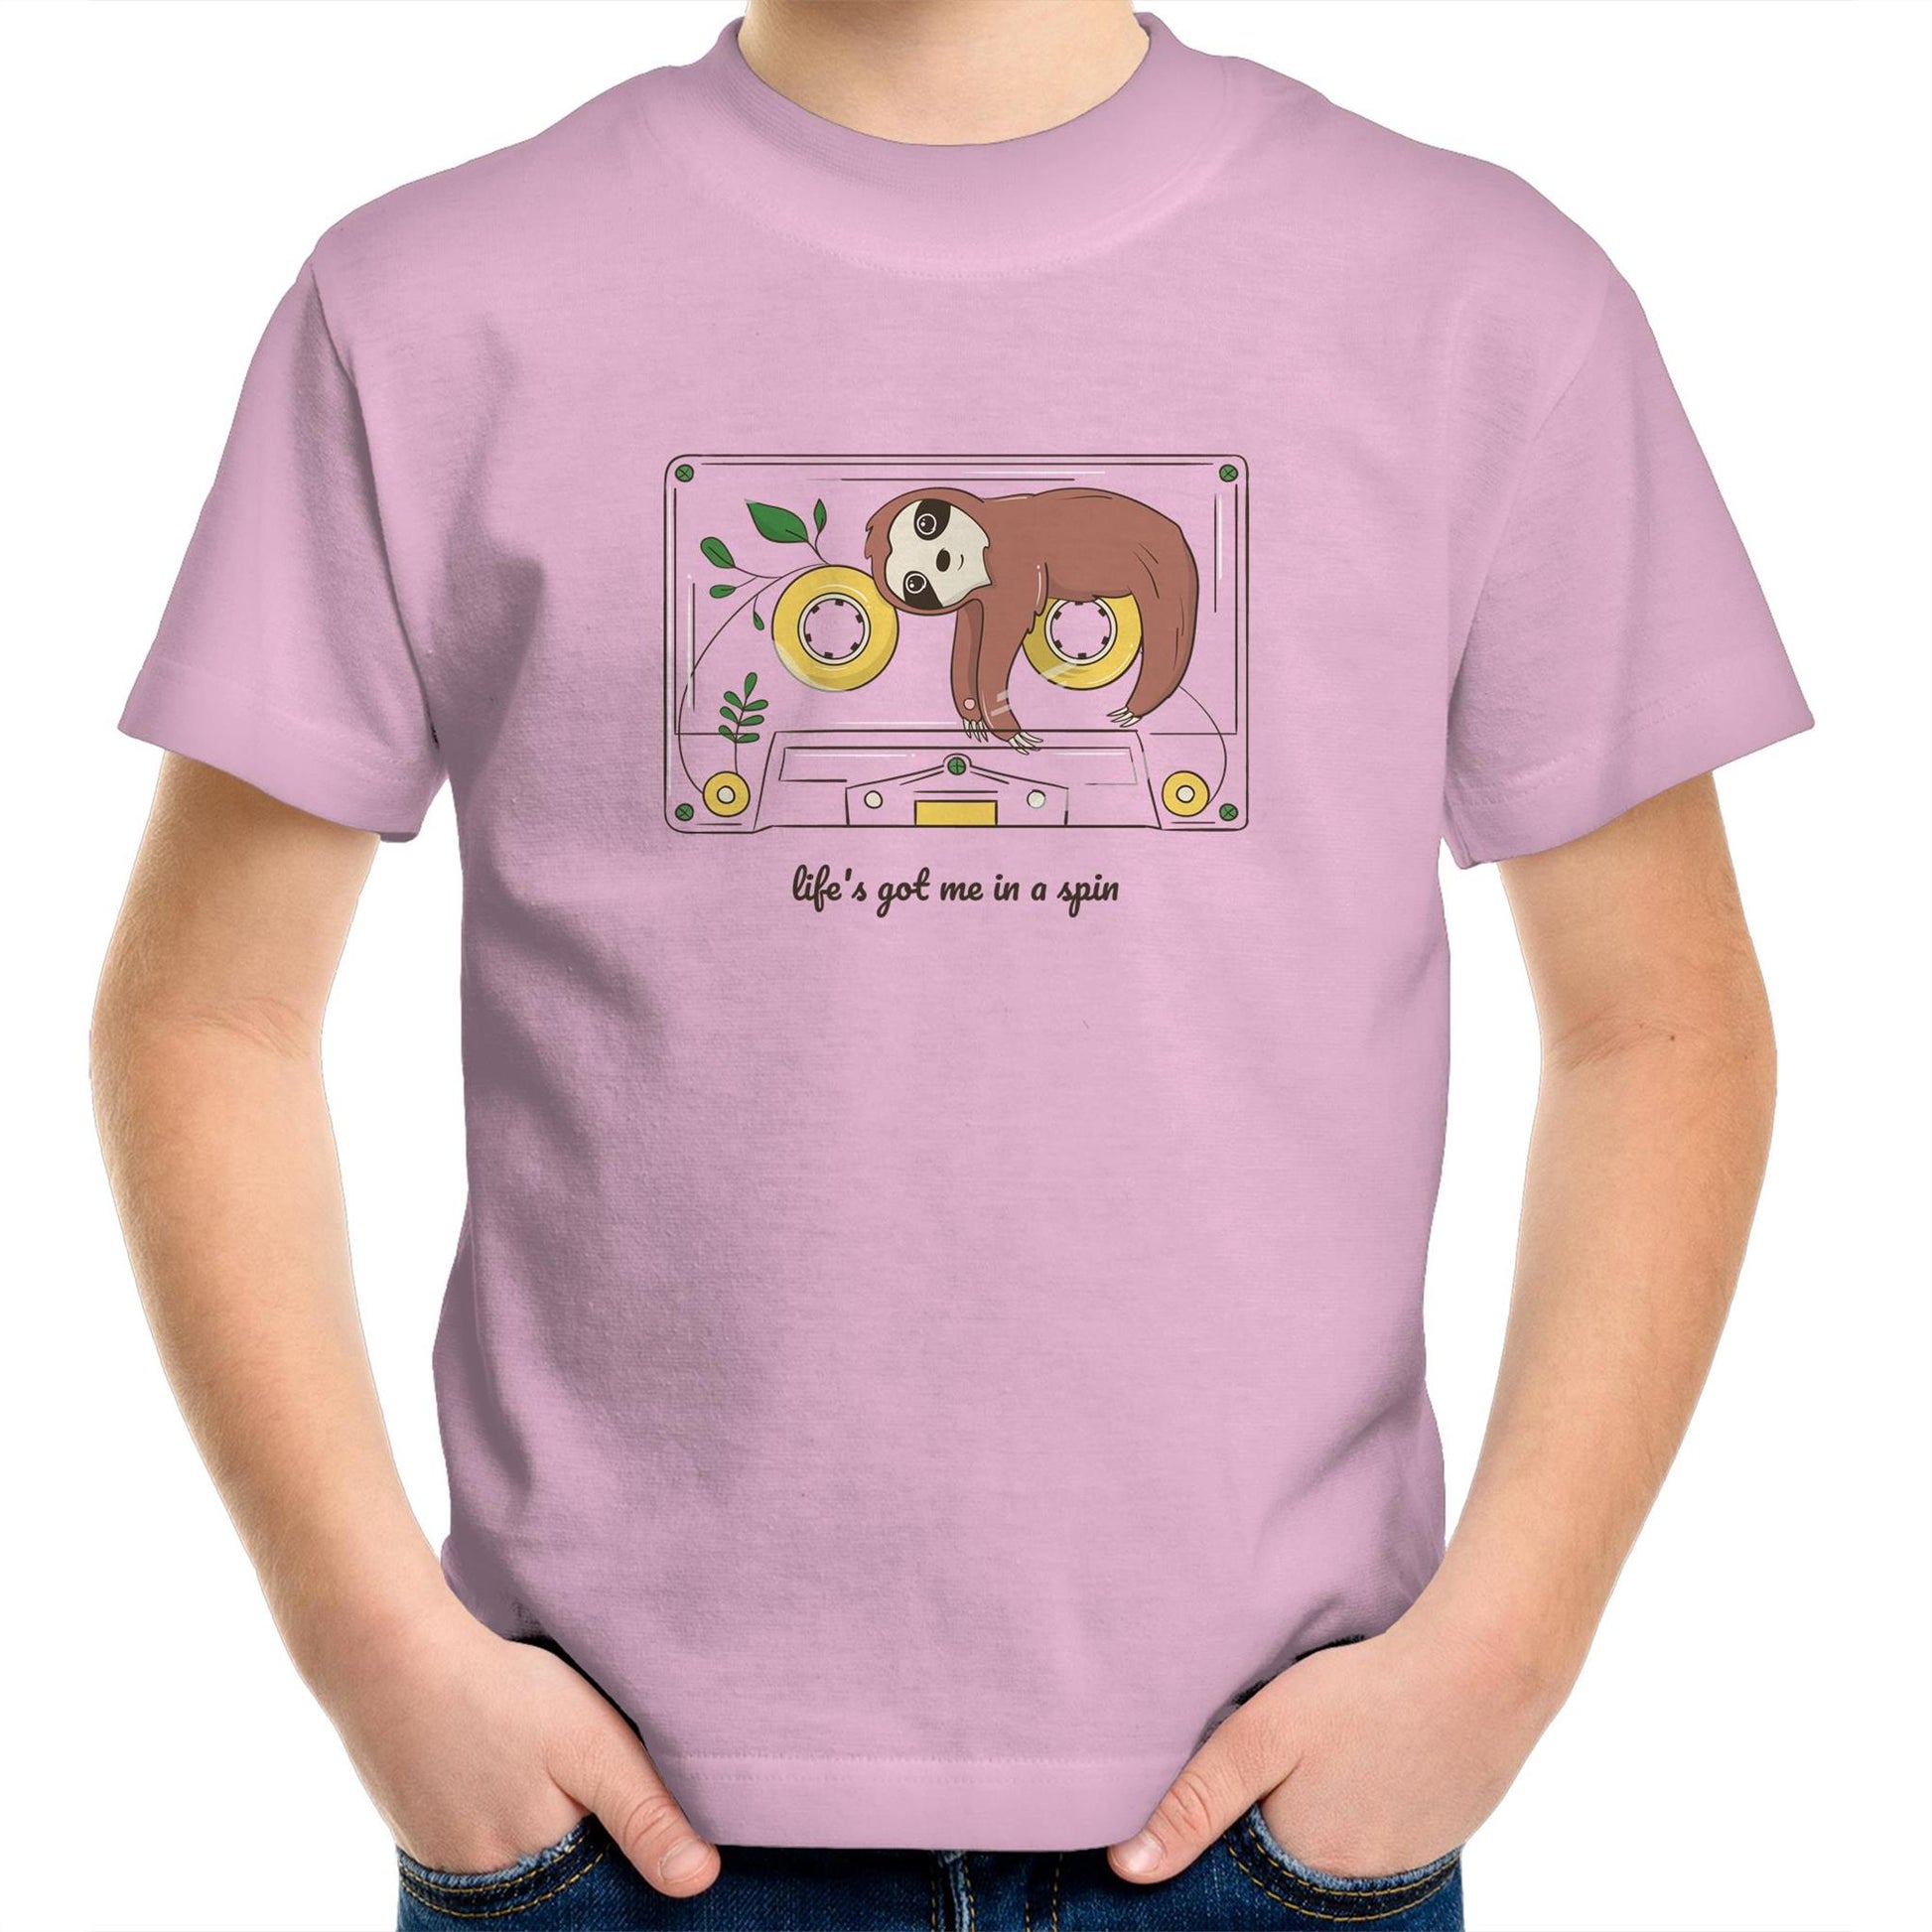 Cassette, Life's Got Me In A Spin - Kids Youth Crew T-Shirt Pink Kids Youth T-shirt animal Music Retro